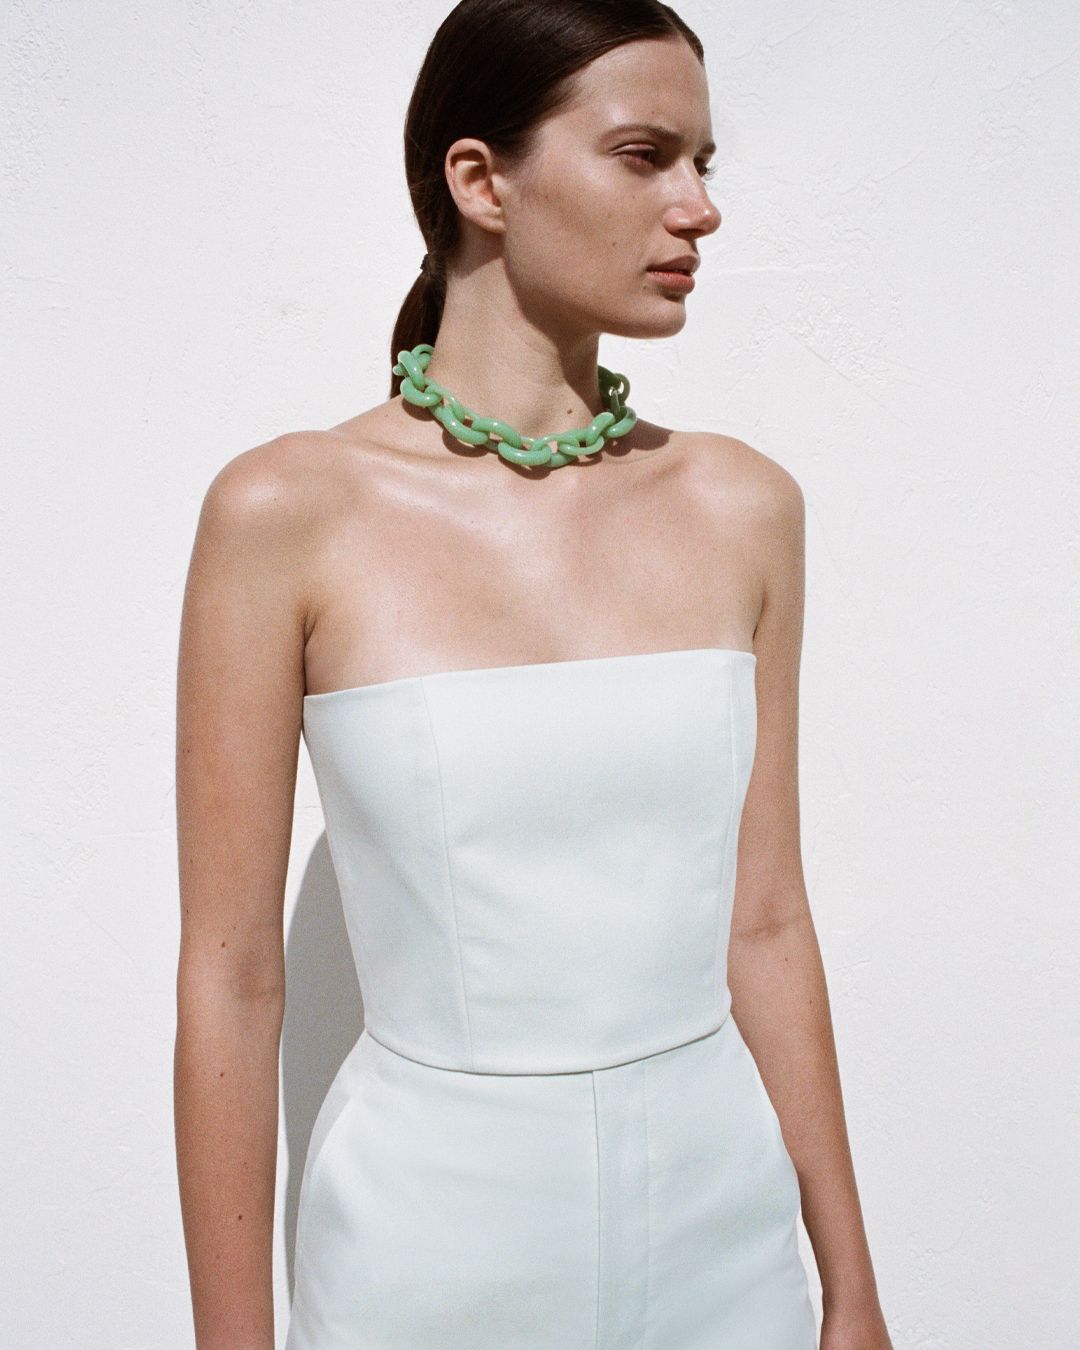 Brunette girl with ponytail wearing a green necklace and green strapless top, against white wall. 